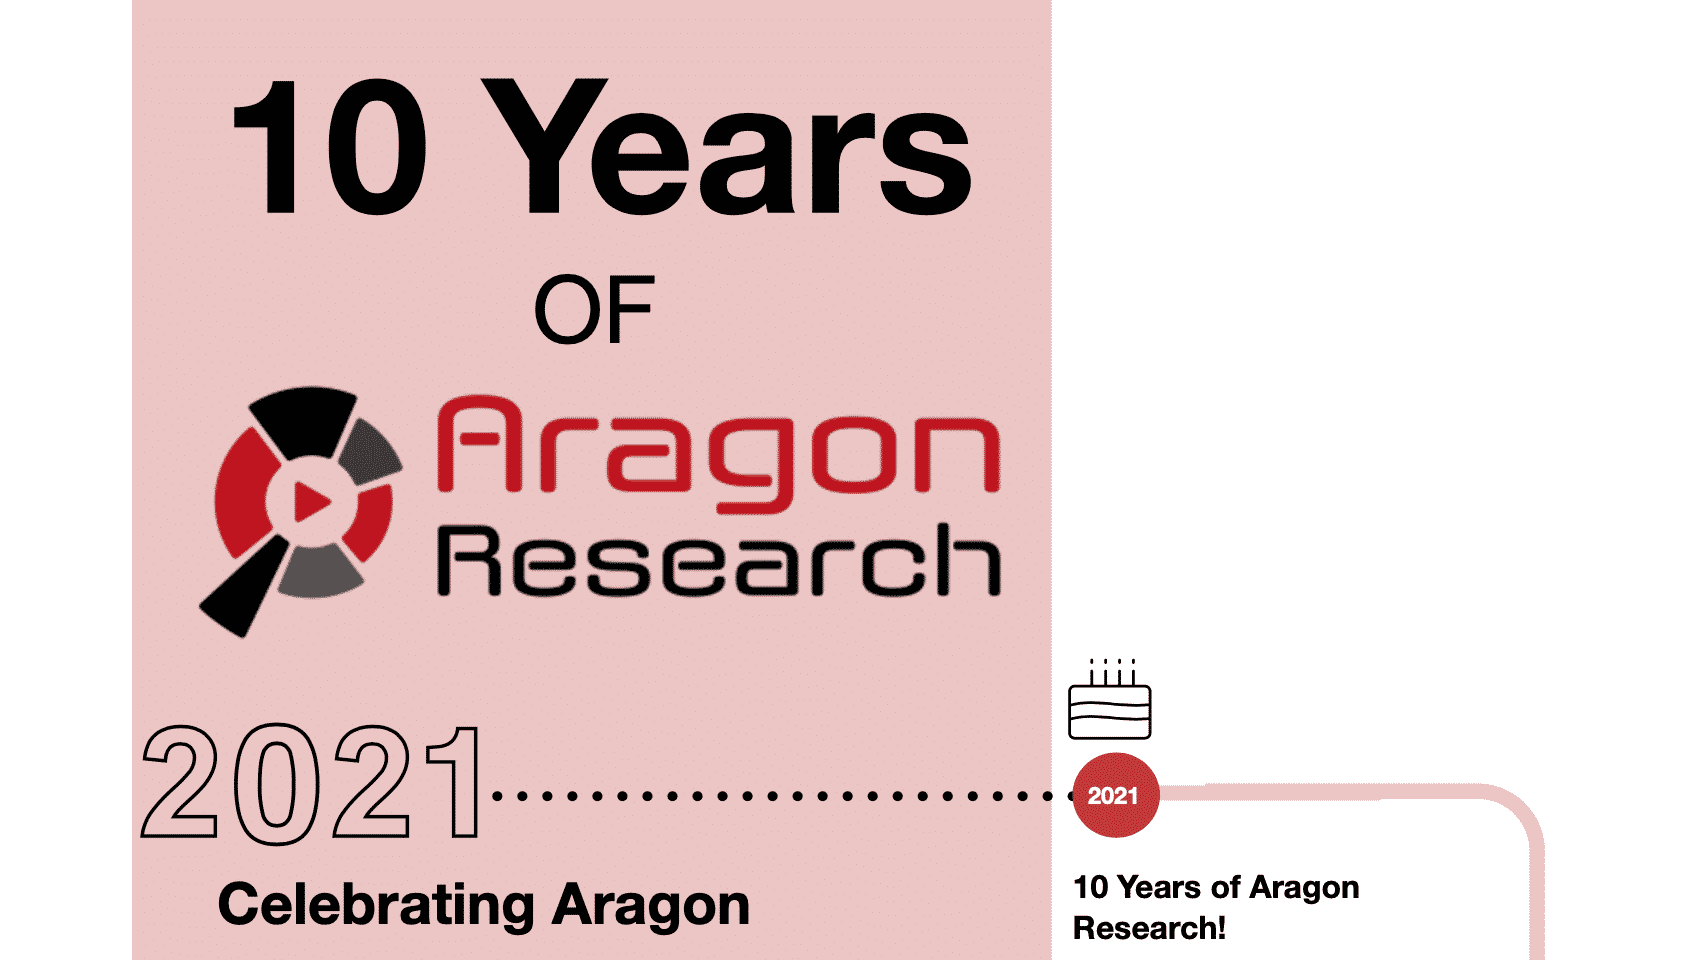 10 years of Aragon Research - [Infographic] 10 Years of Aragon Research